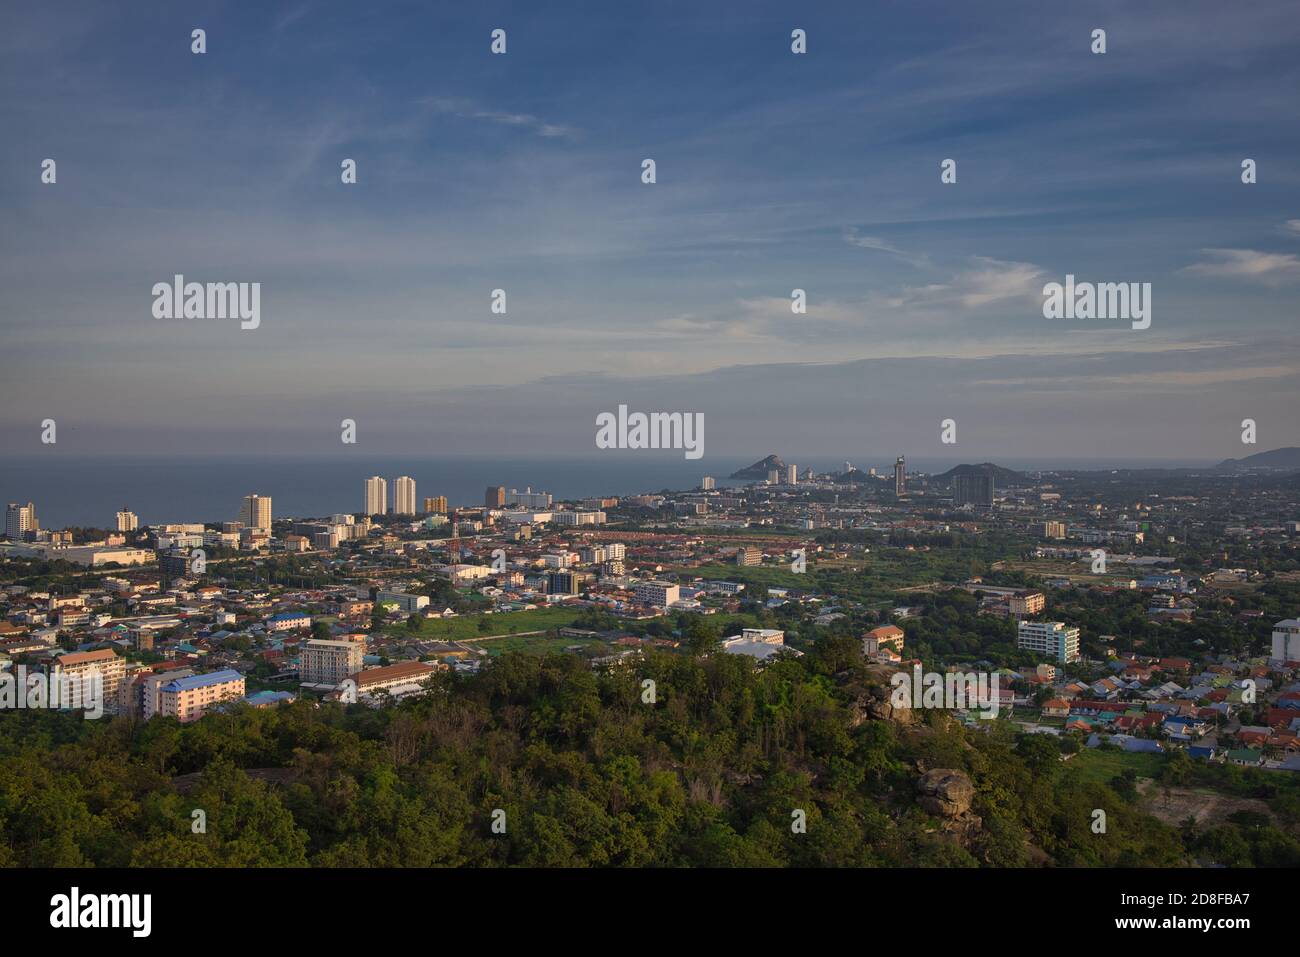 This unique photo shows the sunset in late October over the Thai seaside town called Hua Hin. you can see the houses and mountains very well. Stock Photo